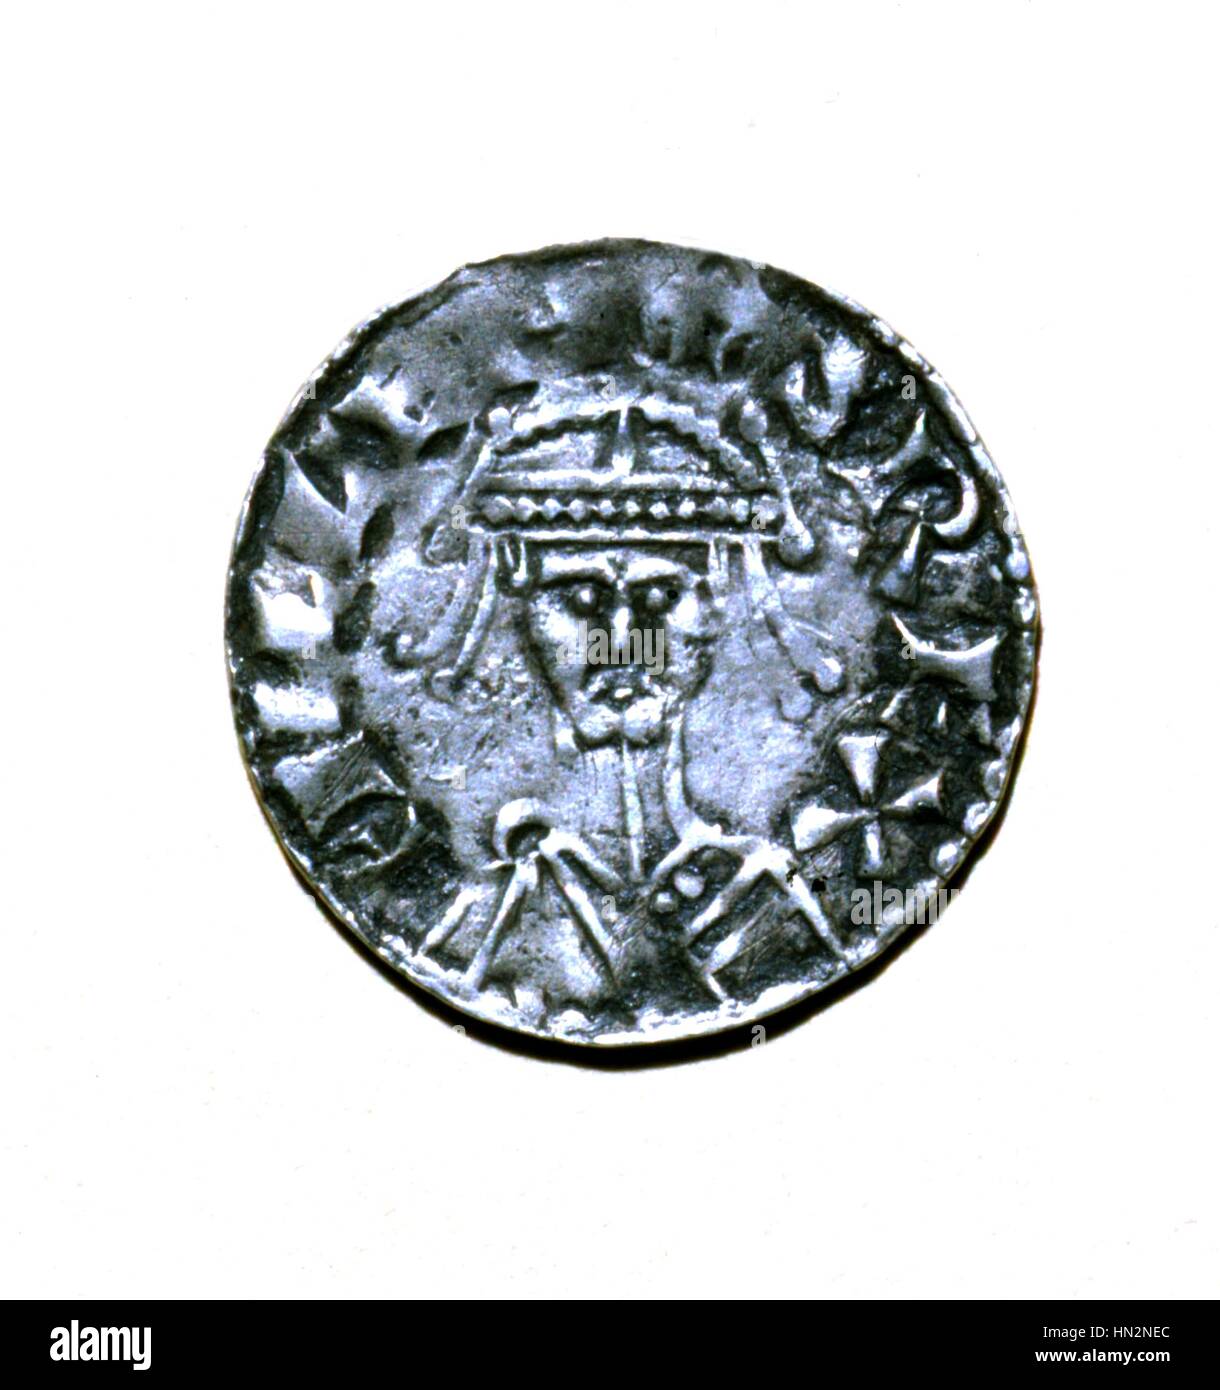 Recto of a silver denier representing William the Conqueror (1027/28-1087), duke of Normandy (1035-1087) and king of England (1066-1087) 11th century France Stock Photo